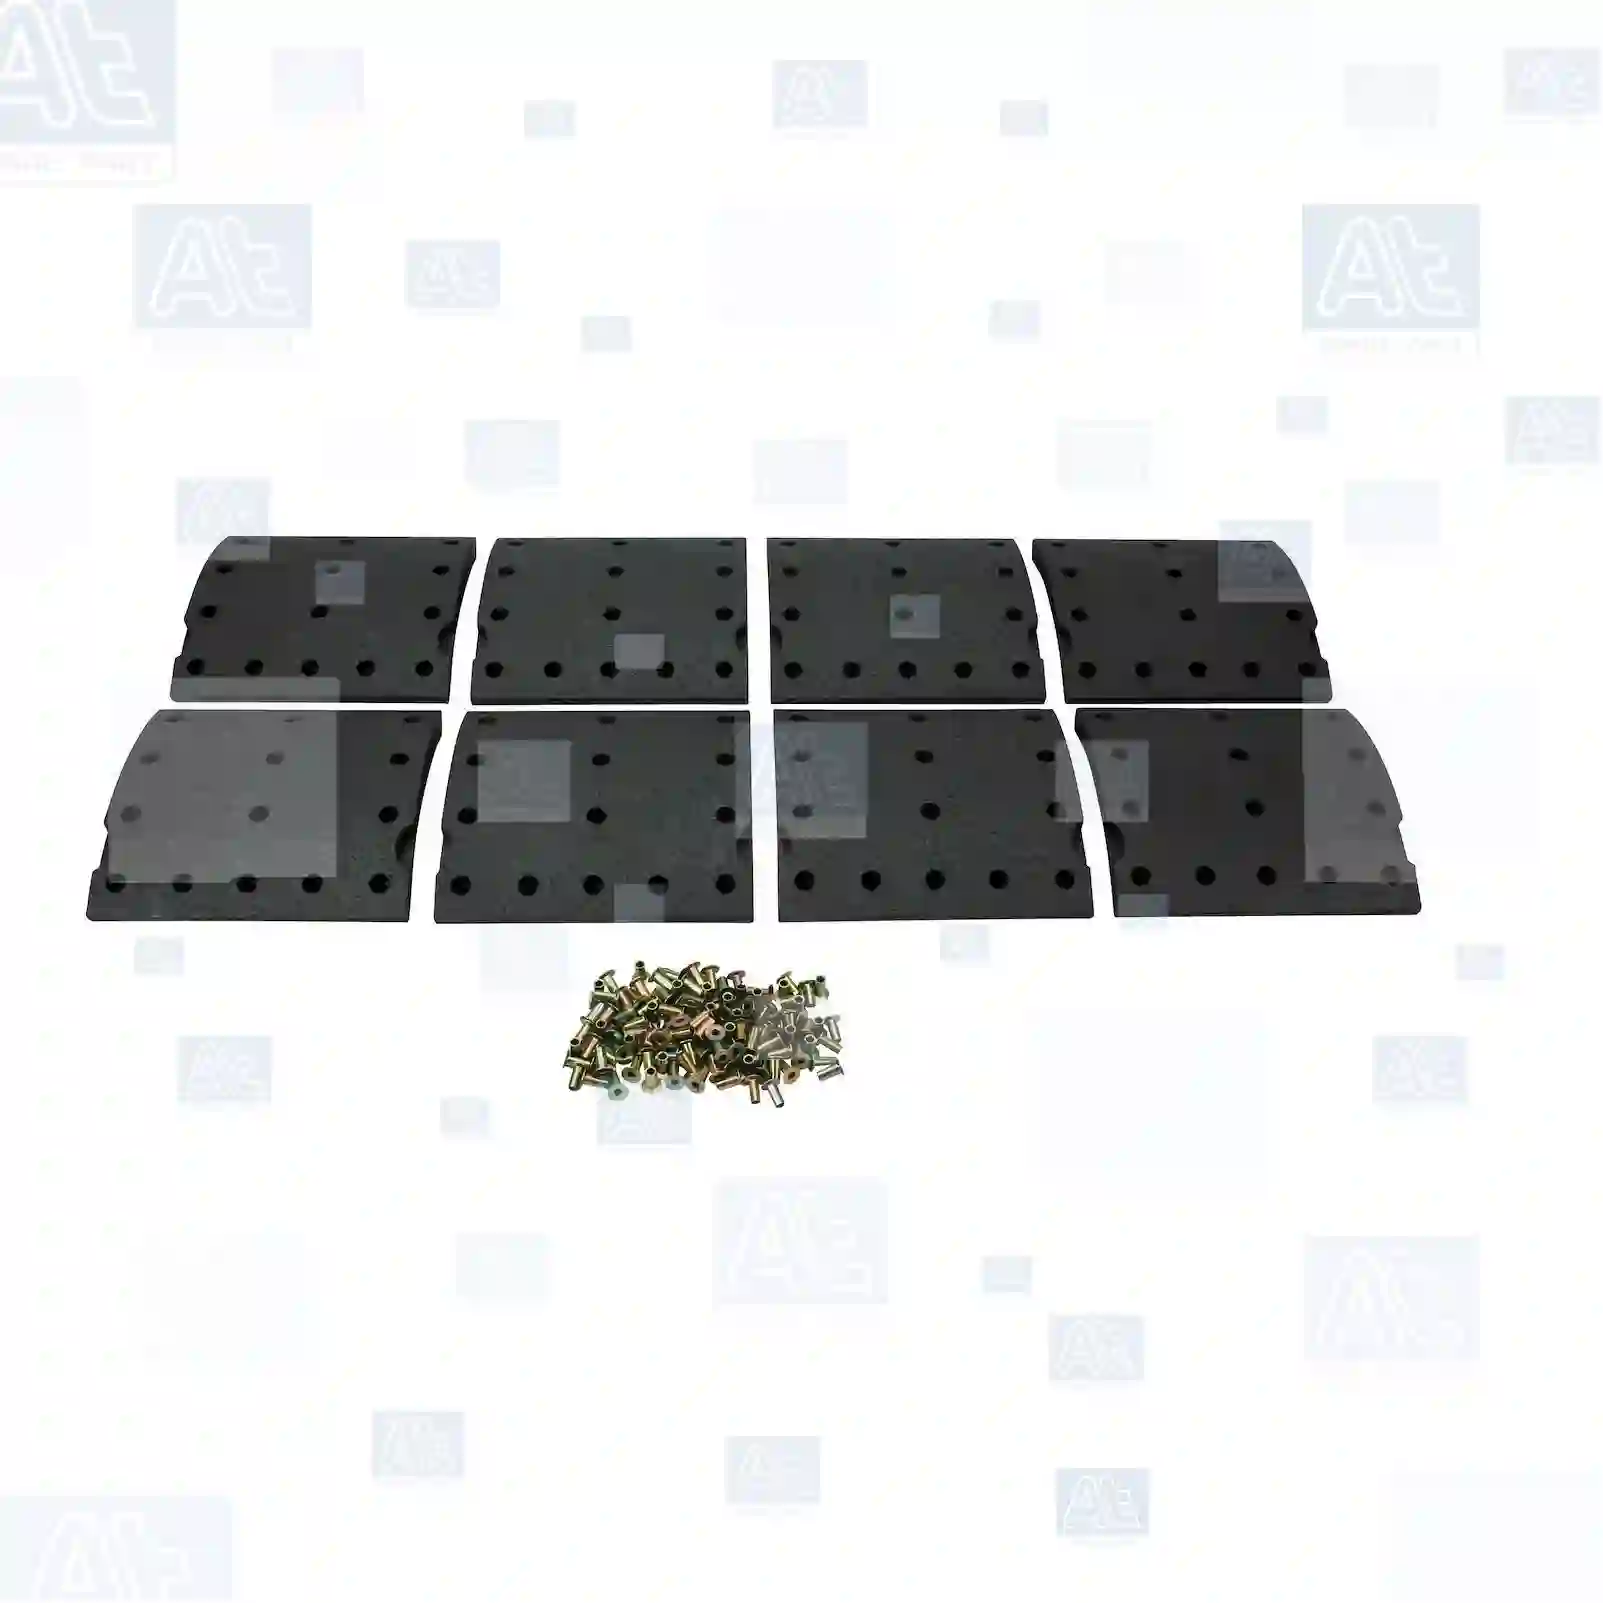 Drum brake lining kit, axle kit, 77713624, 1522138, 5001868089, 7421534386, MBLK1190, 89200340825, 21534385, 21534385S, 270520, 270520S, 270836, 270836S, 2708361, 270942, 270942S, 2709426, 270976, 270976S, 2709765, 275996, 275996S, 3090349, 3090349S, 3091458, 3091458S, 3093263, 3095169, 3095169S, 3095179, 3095179S, 3095189, 3095189S, ZG50449-0008 ||  77713624 At Spare Part | Engine, Accelerator Pedal, Camshaft, Connecting Rod, Crankcase, Crankshaft, Cylinder Head, Engine Suspension Mountings, Exhaust Manifold, Exhaust Gas Recirculation, Filter Kits, Flywheel Housing, General Overhaul Kits, Engine, Intake Manifold, Oil Cleaner, Oil Cooler, Oil Filter, Oil Pump, Oil Sump, Piston & Liner, Sensor & Switch, Timing Case, Turbocharger, Cooling System, Belt Tensioner, Coolant Filter, Coolant Pipe, Corrosion Prevention Agent, Drive, Expansion Tank, Fan, Intercooler, Monitors & Gauges, Radiator, Thermostat, V-Belt / Timing belt, Water Pump, Fuel System, Electronical Injector Unit, Feed Pump, Fuel Filter, cpl., Fuel Gauge Sender,  Fuel Line, Fuel Pump, Fuel Tank, Injection Line Kit, Injection Pump, Exhaust System, Clutch & Pedal, Gearbox, Propeller Shaft, Axles, Brake System, Hubs & Wheels, Suspension, Leaf Spring, Universal Parts / Accessories, Steering, Electrical System, Cabin Drum brake lining kit, axle kit, 77713624, 1522138, 5001868089, 7421534386, MBLK1190, 89200340825, 21534385, 21534385S, 270520, 270520S, 270836, 270836S, 2708361, 270942, 270942S, 2709426, 270976, 270976S, 2709765, 275996, 275996S, 3090349, 3090349S, 3091458, 3091458S, 3093263, 3095169, 3095169S, 3095179, 3095179S, 3095189, 3095189S, ZG50449-0008 ||  77713624 At Spare Part | Engine, Accelerator Pedal, Camshaft, Connecting Rod, Crankcase, Crankshaft, Cylinder Head, Engine Suspension Mountings, Exhaust Manifold, Exhaust Gas Recirculation, Filter Kits, Flywheel Housing, General Overhaul Kits, Engine, Intake Manifold, Oil Cleaner, Oil Cooler, Oil Filter, Oil Pump, Oil Sump, Piston & Liner, Sensor & Switch, Timing Case, Turbocharger, Cooling System, Belt Tensioner, Coolant Filter, Coolant Pipe, Corrosion Prevention Agent, Drive, Expansion Tank, Fan, Intercooler, Monitors & Gauges, Radiator, Thermostat, V-Belt / Timing belt, Water Pump, Fuel System, Electronical Injector Unit, Feed Pump, Fuel Filter, cpl., Fuel Gauge Sender,  Fuel Line, Fuel Pump, Fuel Tank, Injection Line Kit, Injection Pump, Exhaust System, Clutch & Pedal, Gearbox, Propeller Shaft, Axles, Brake System, Hubs & Wheels, Suspension, Leaf Spring, Universal Parts / Accessories, Steering, Electrical System, Cabin